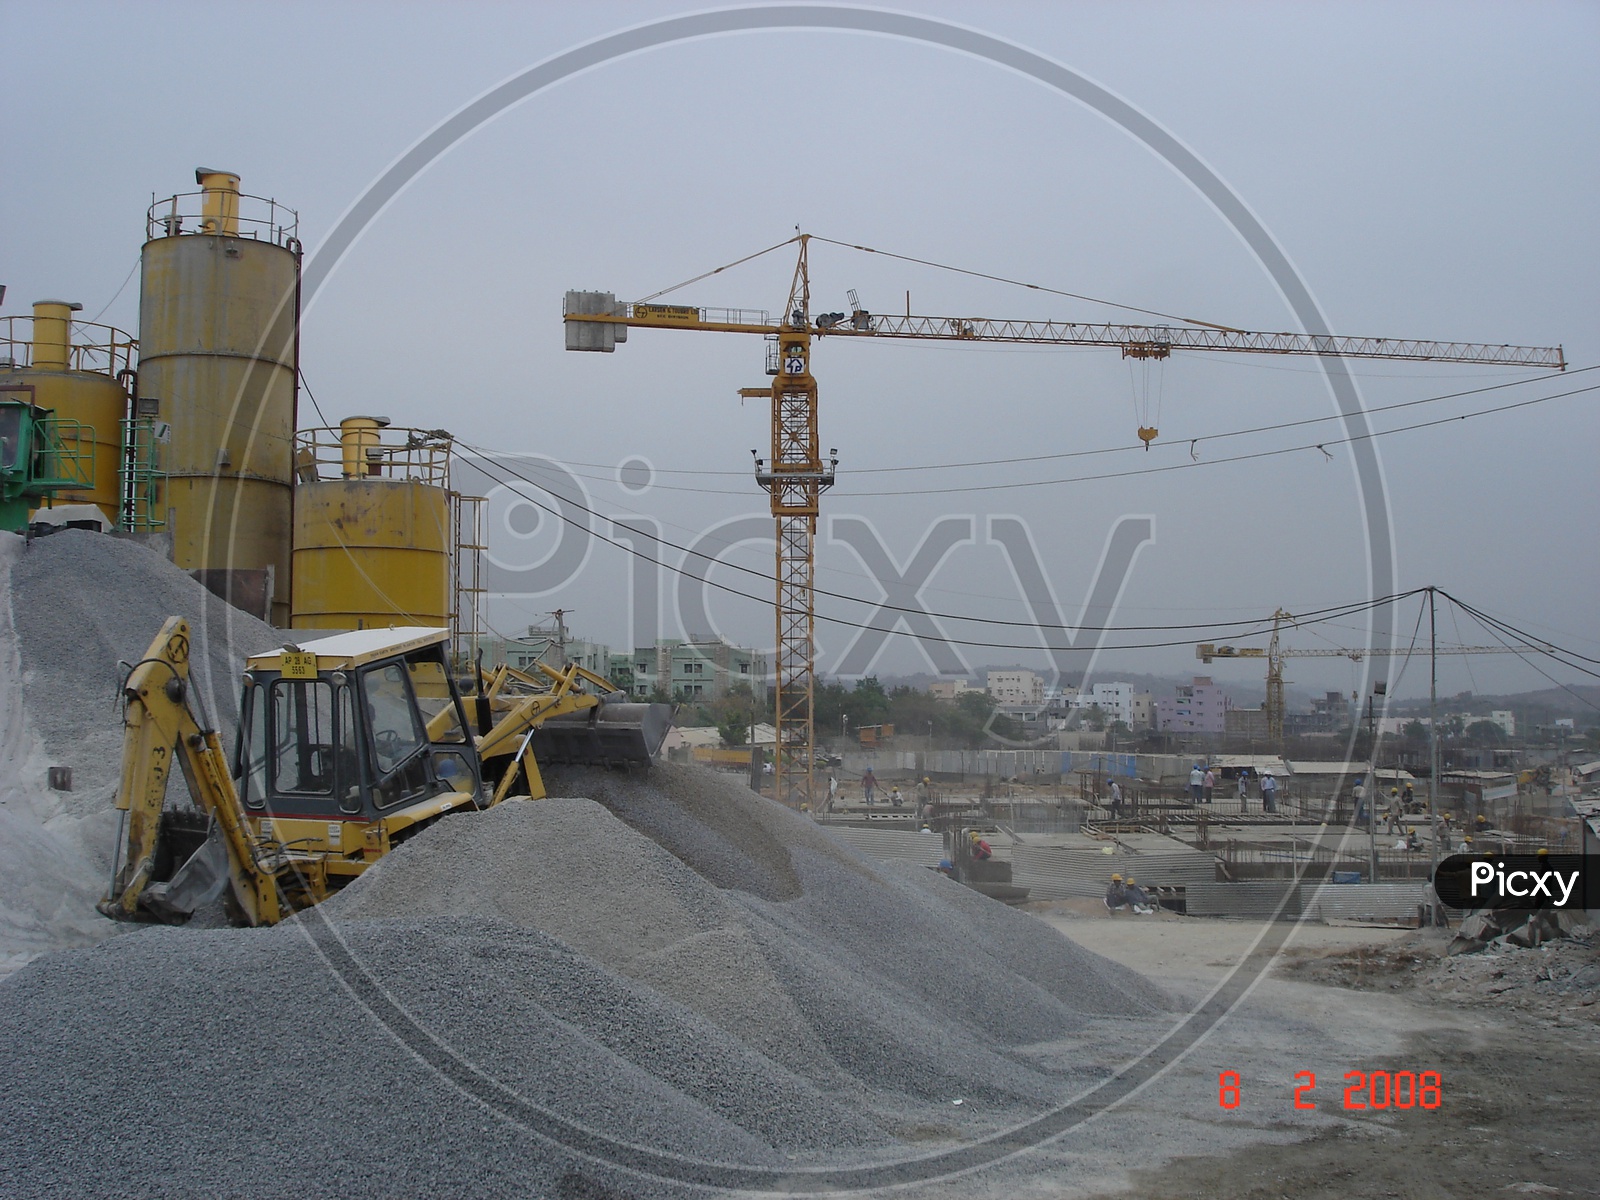 Basalt powder heap alongside the grinder machinery and the tower crane